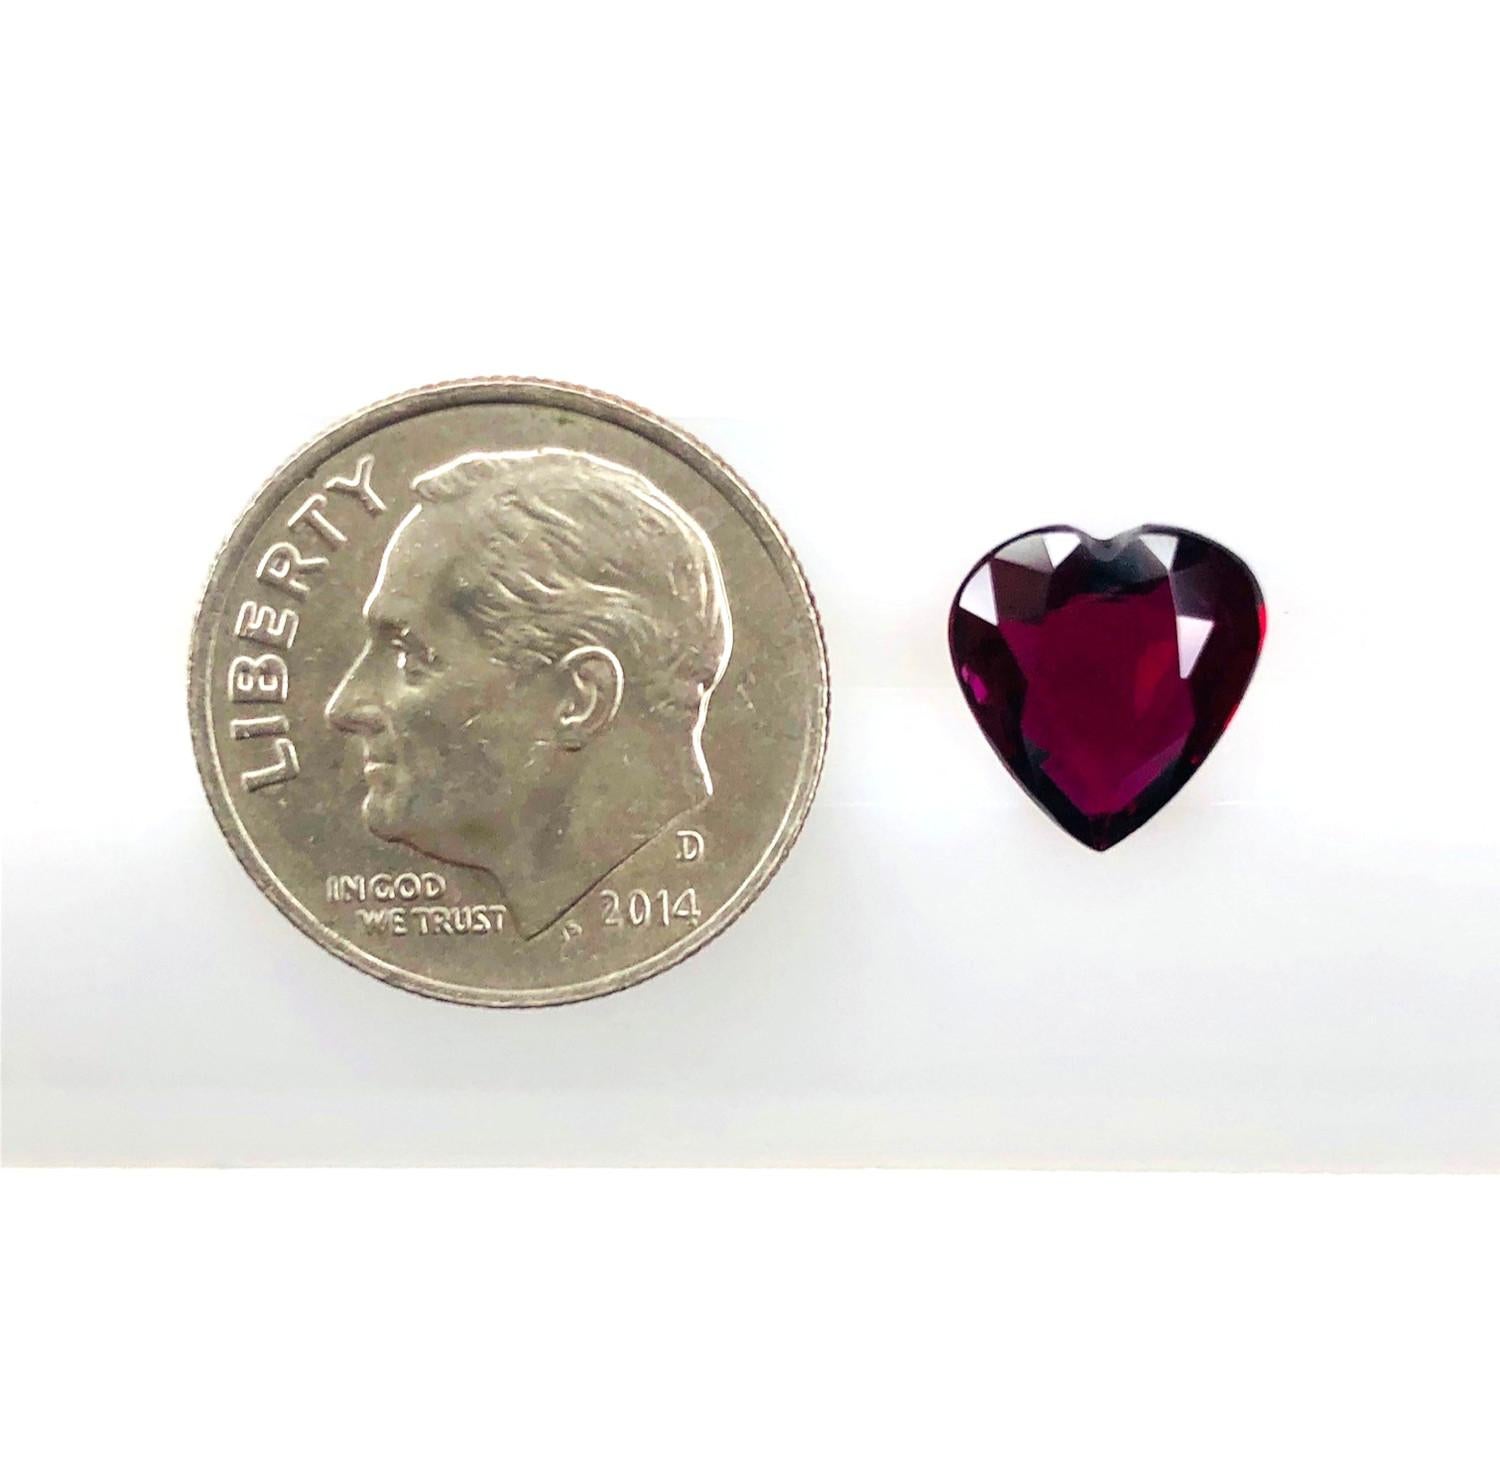 Heart Cut 2.00 Carat Heart Shaped Ruby, Unset Loose Gemstone, GIA Certified For Sale